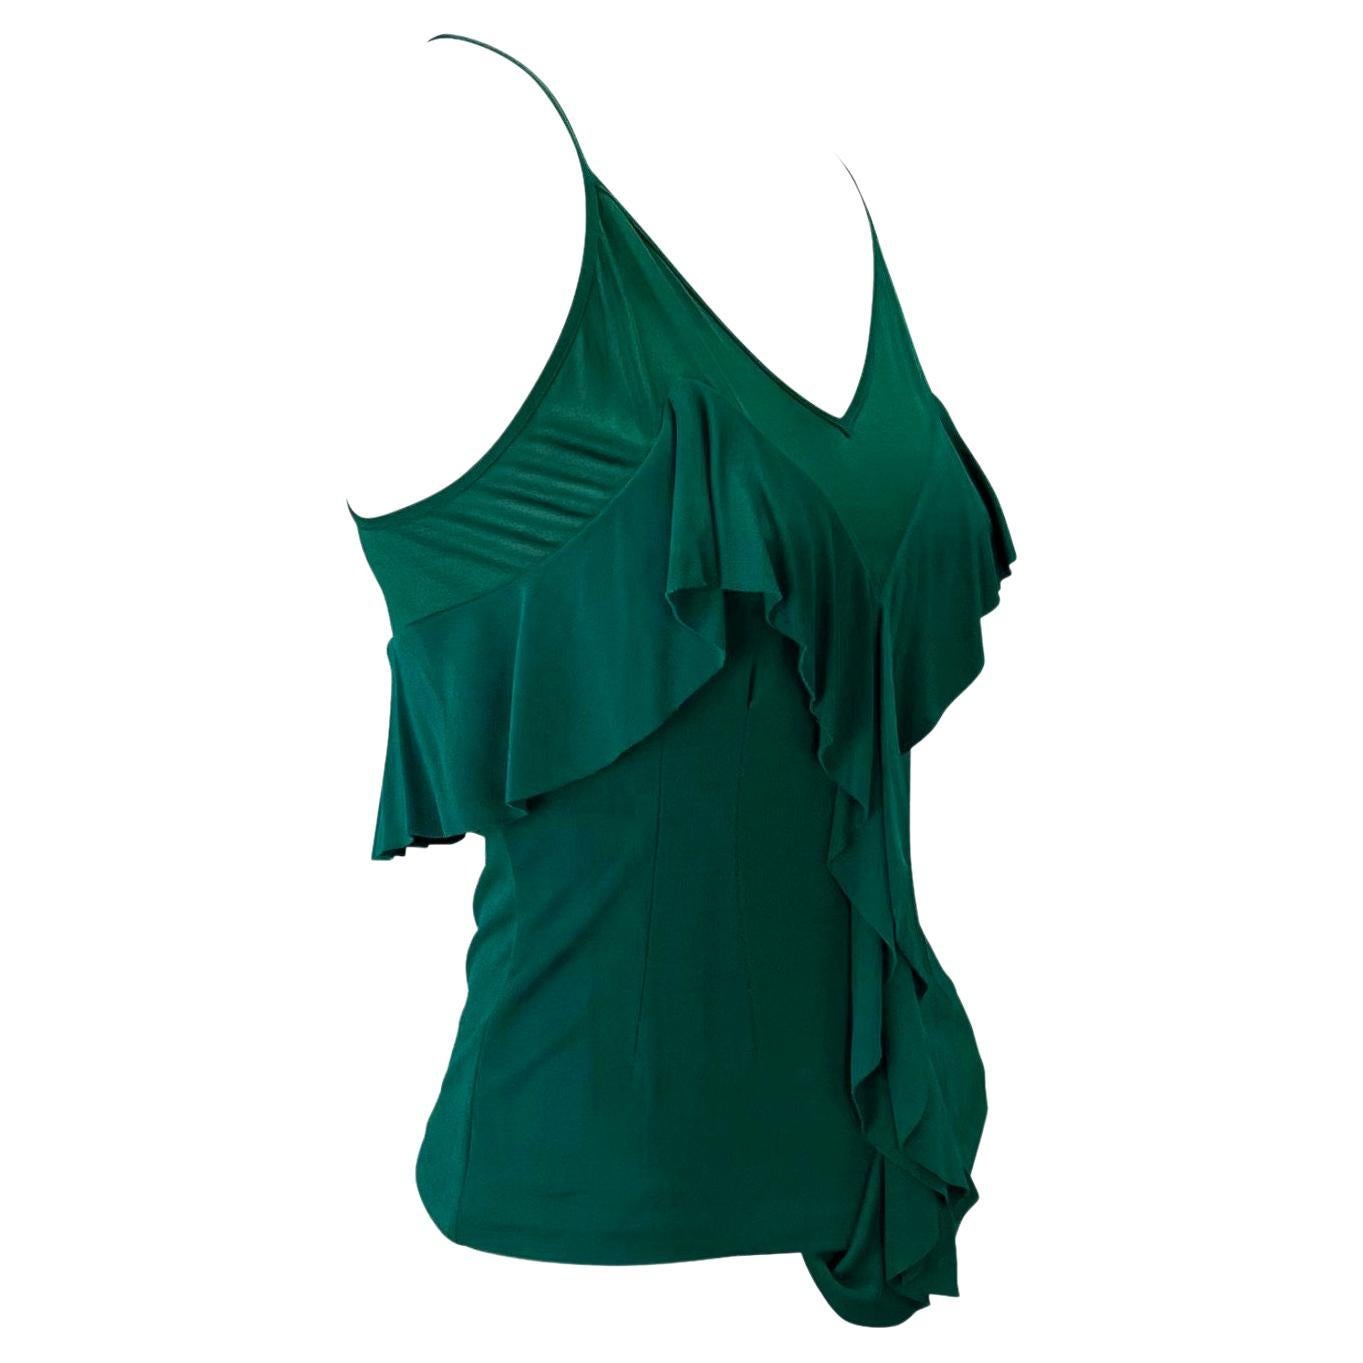 F/W 2003 Yves Saint Laurent by Tom Ford Teal Green Sheer Ruffle Tank Top For Sale 3